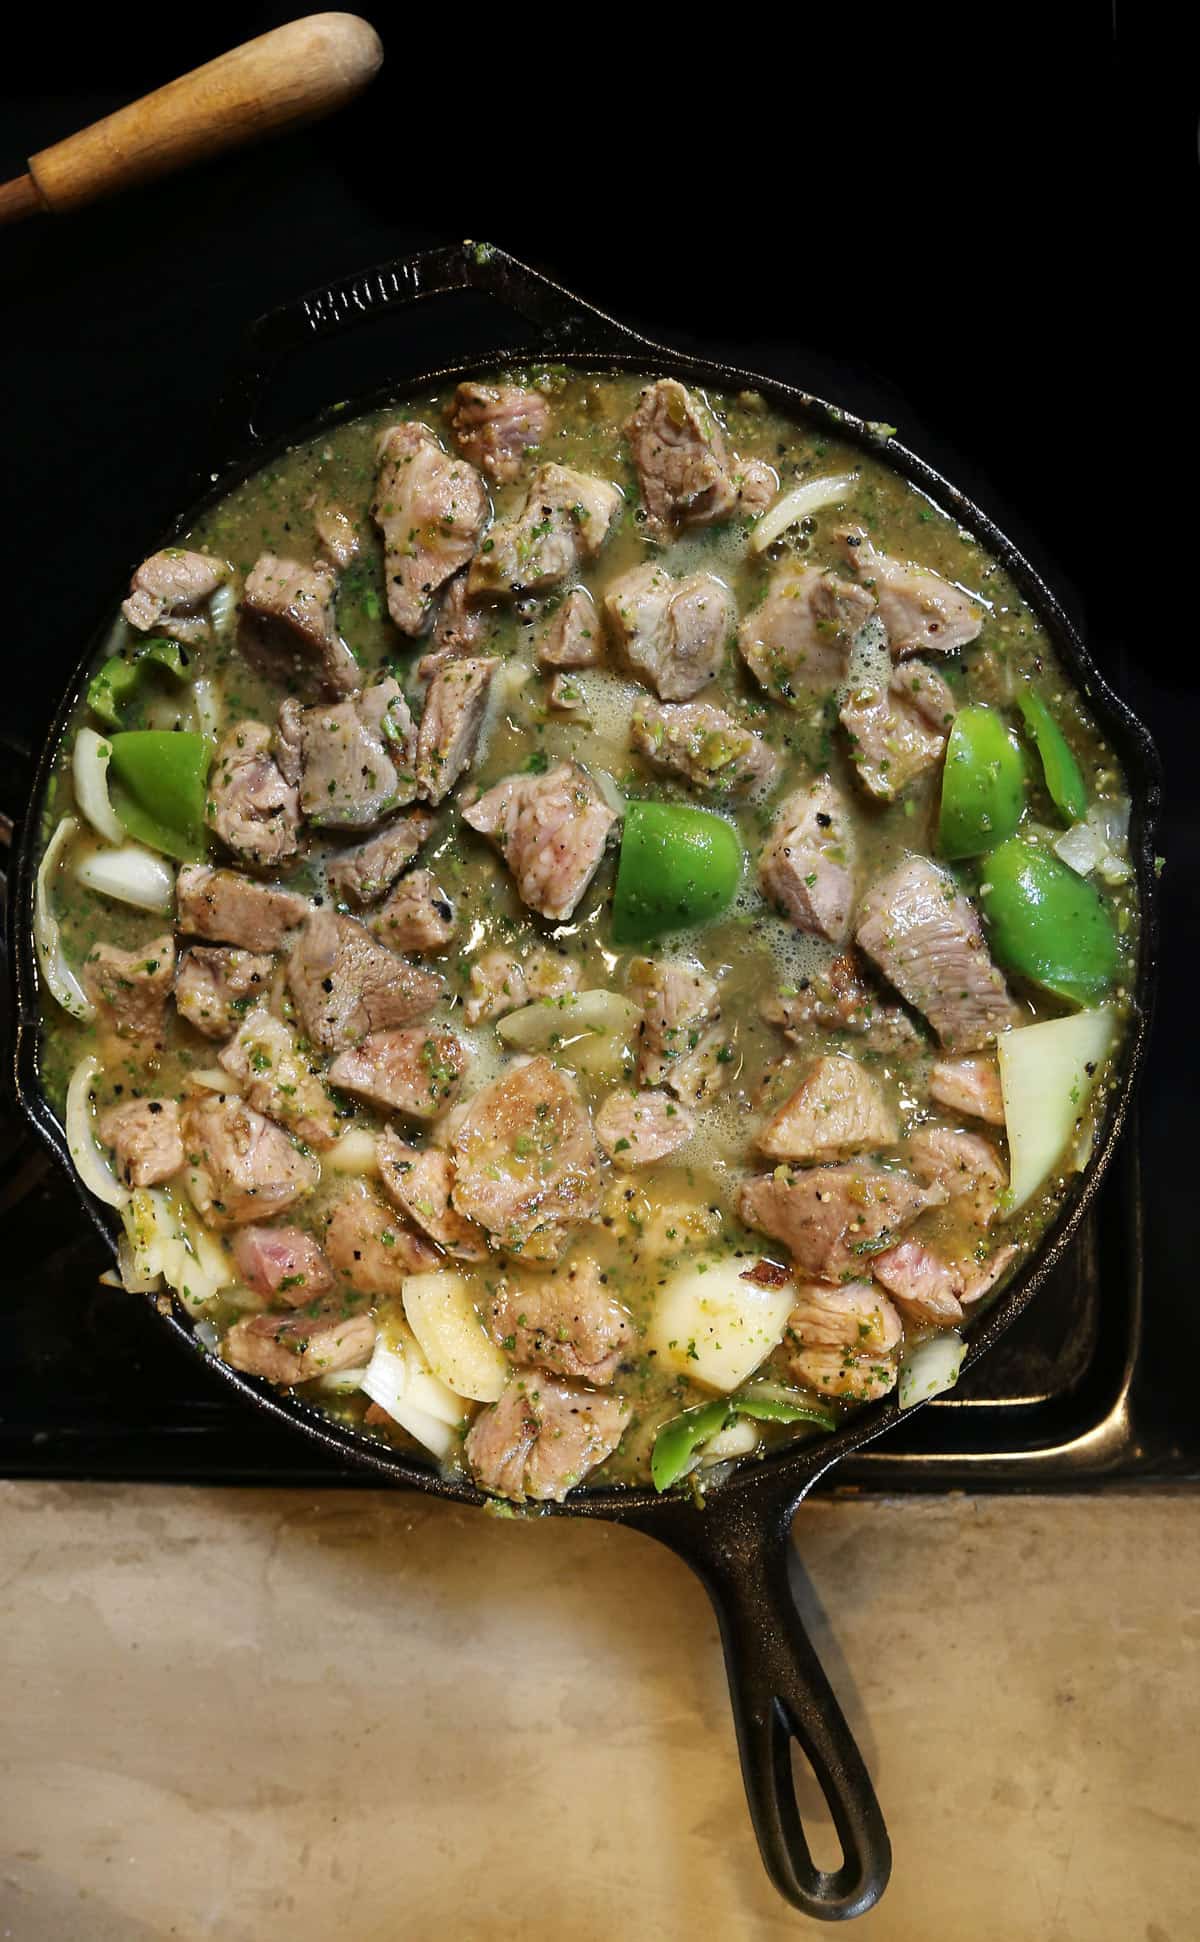 Chile Verde Pork is a green chili with pork that's simmered until melt-in-your-mouth tender in a rich stew of smoky roasted tomatillos, onions, chilis and herbs like cilantro and oregano. chile verde recipe | chili verde | chile verde pork